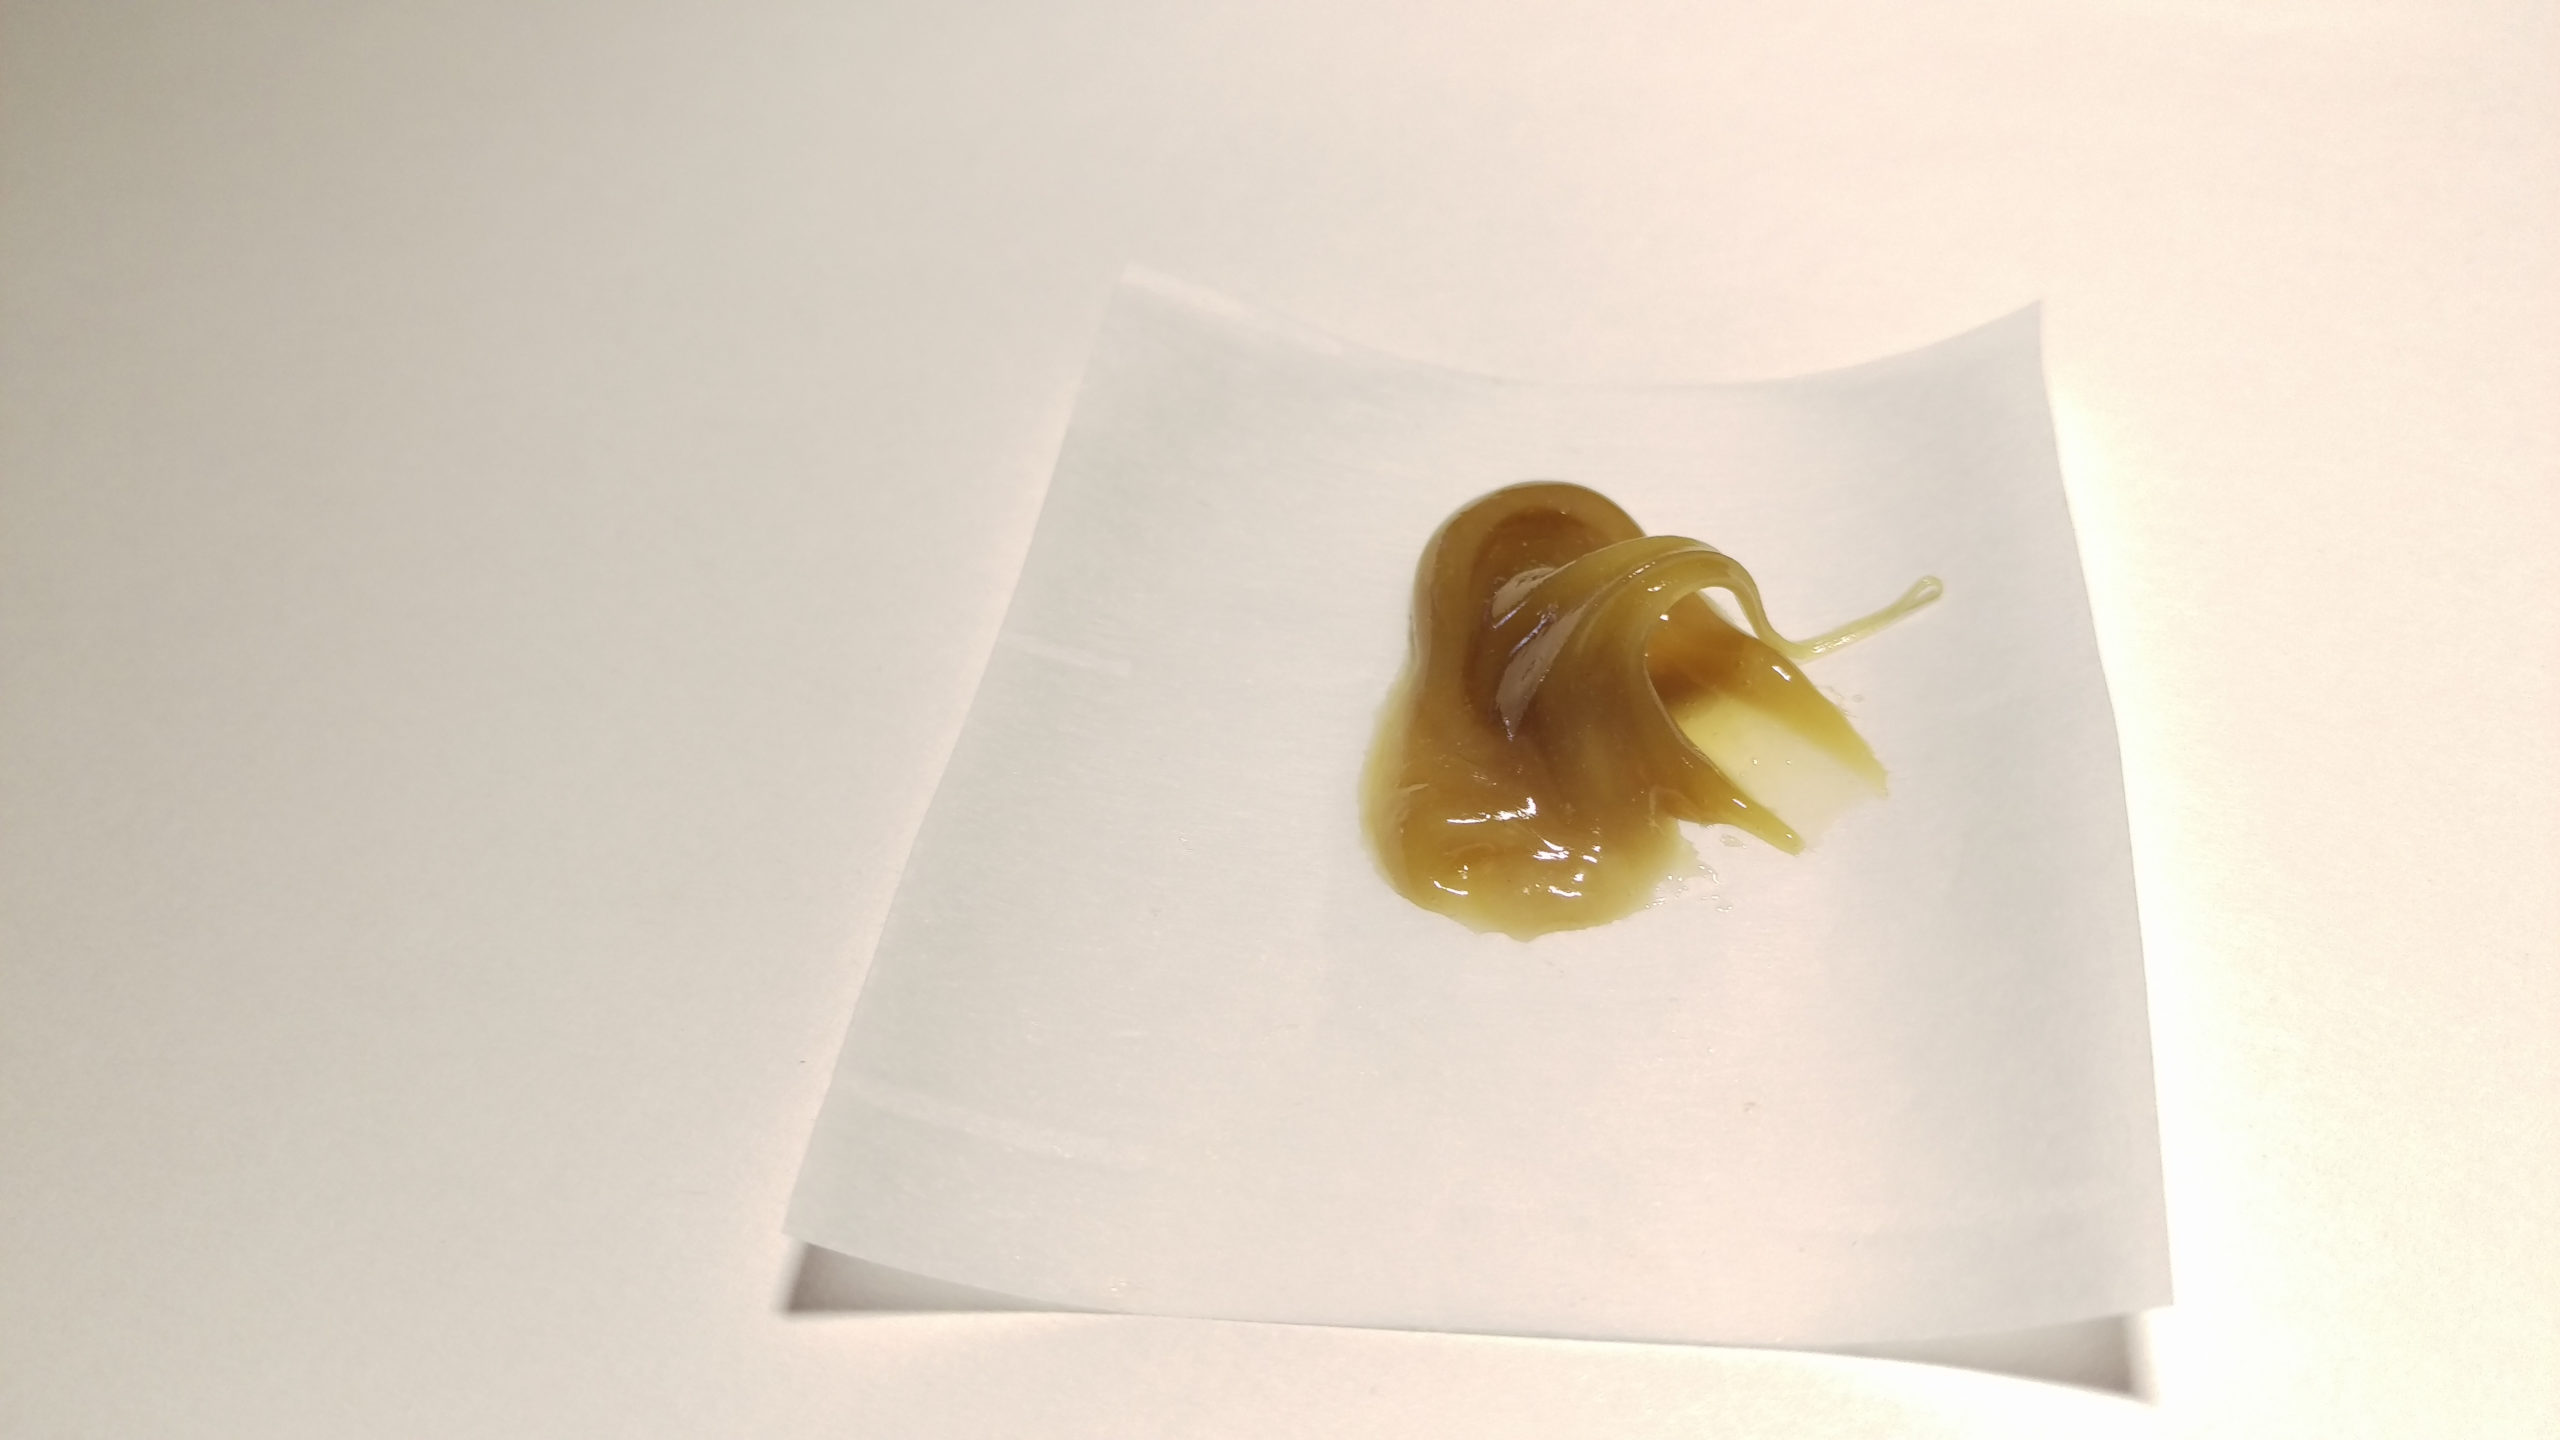 how to make rosin